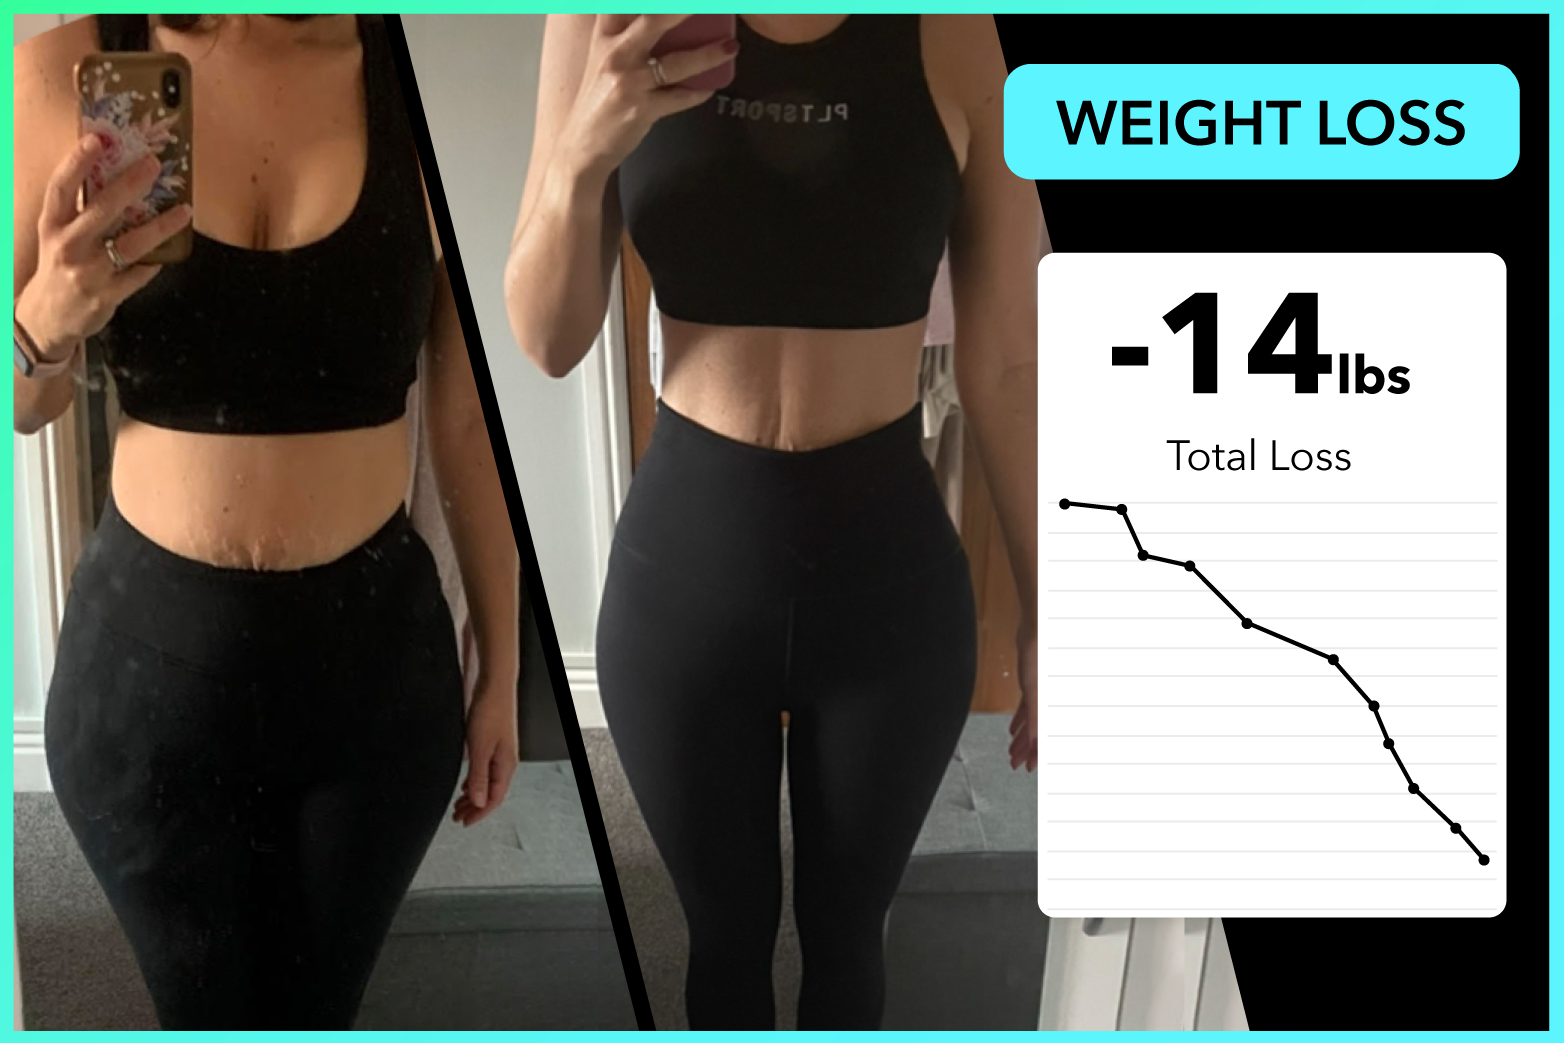 Vicky lost 14lbs with Team RH!